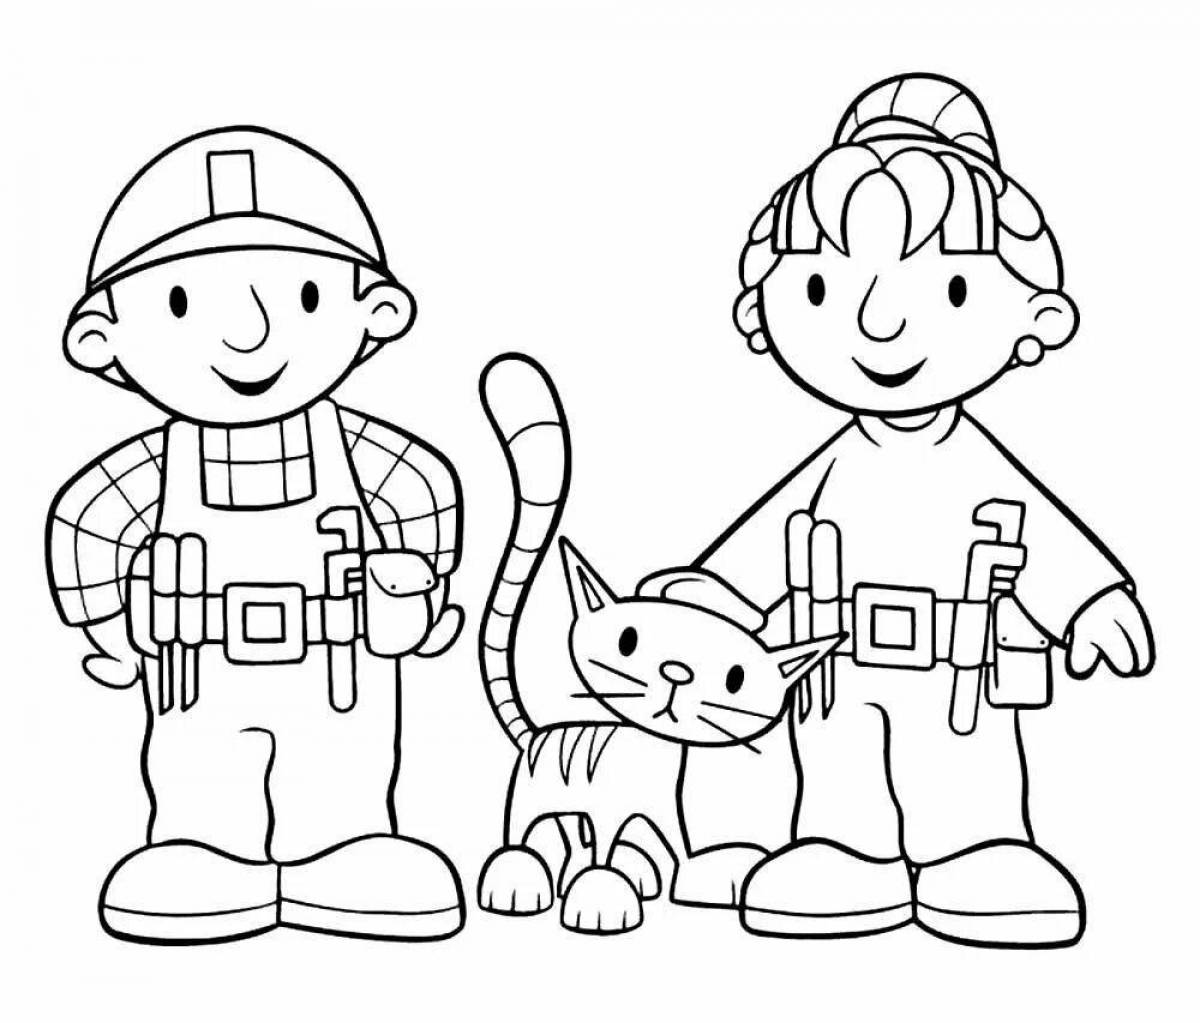 Colorful janitor coloring page